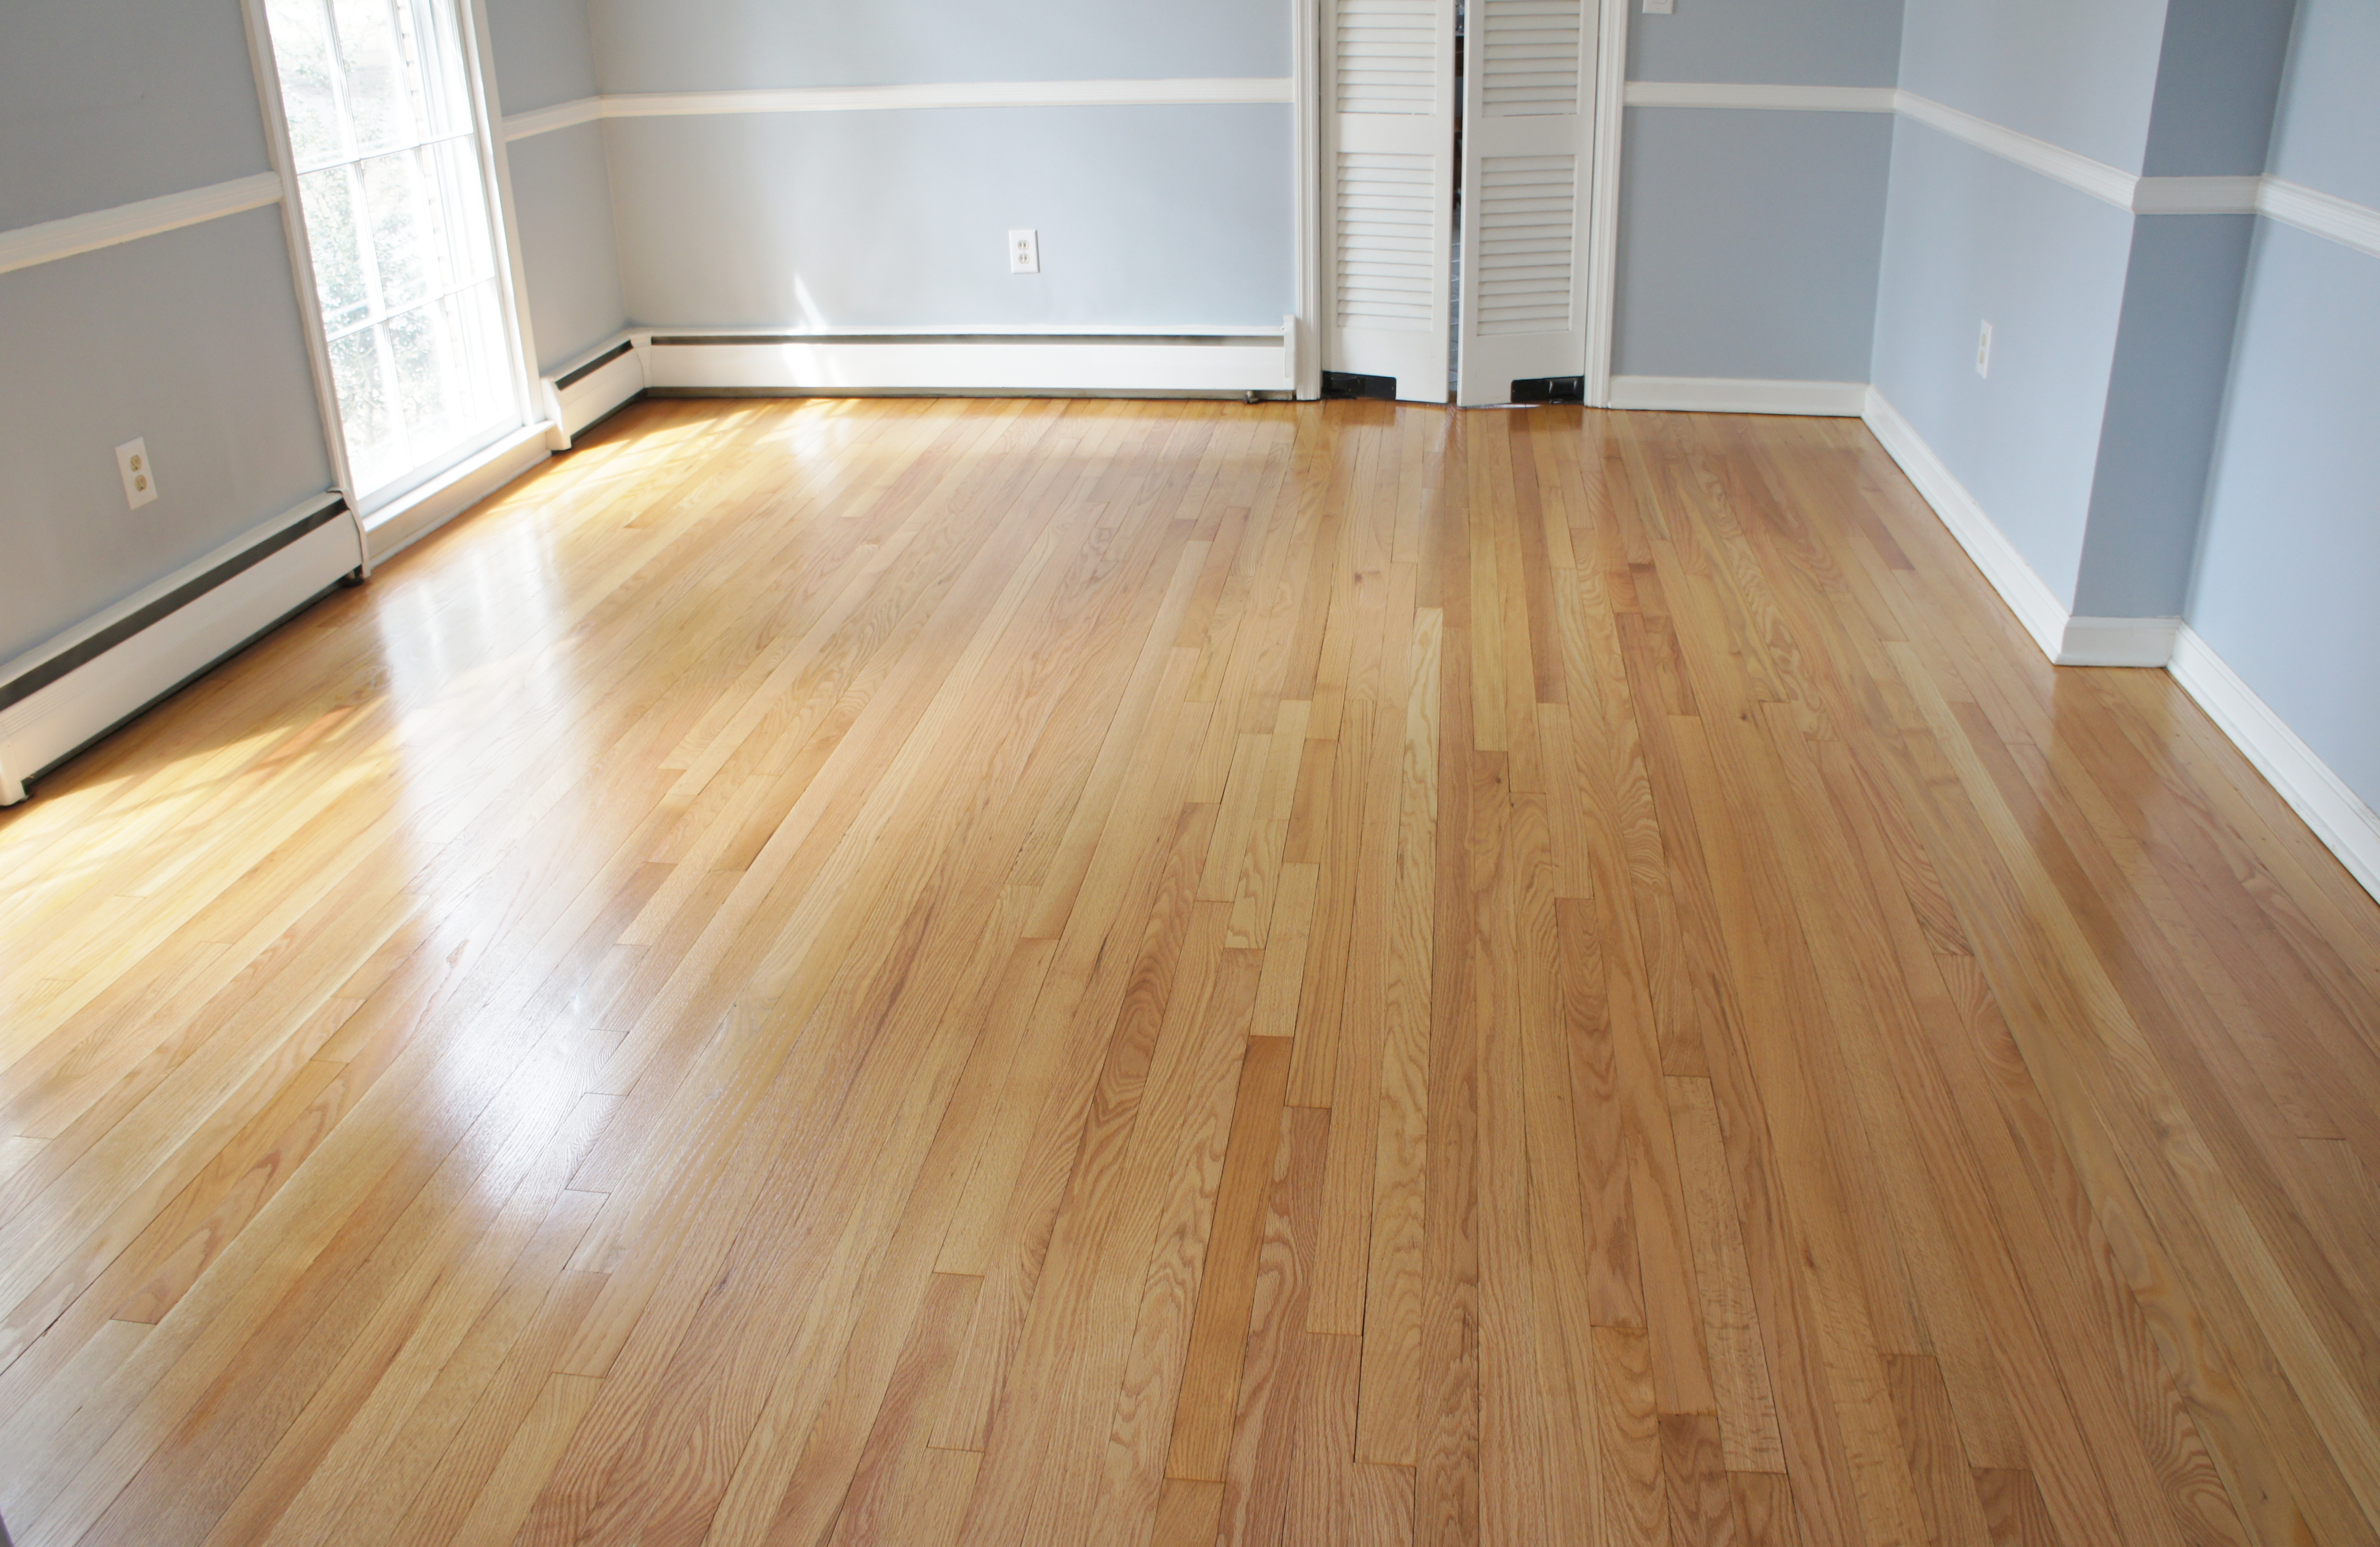 Hardwood floors in an empty room with blue walls